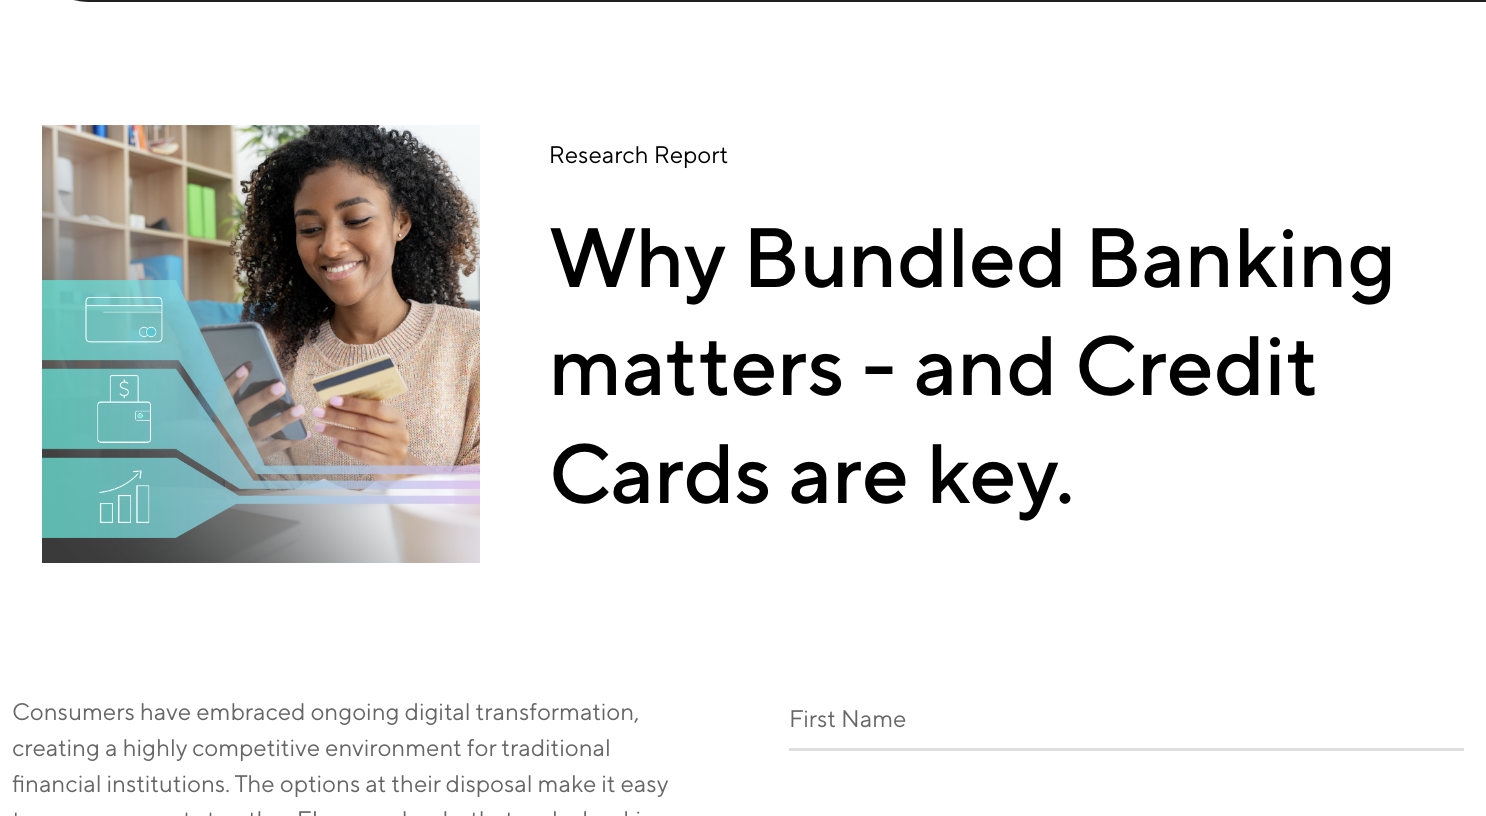 Why Bundled Banking matters - and Credit Cards are key.